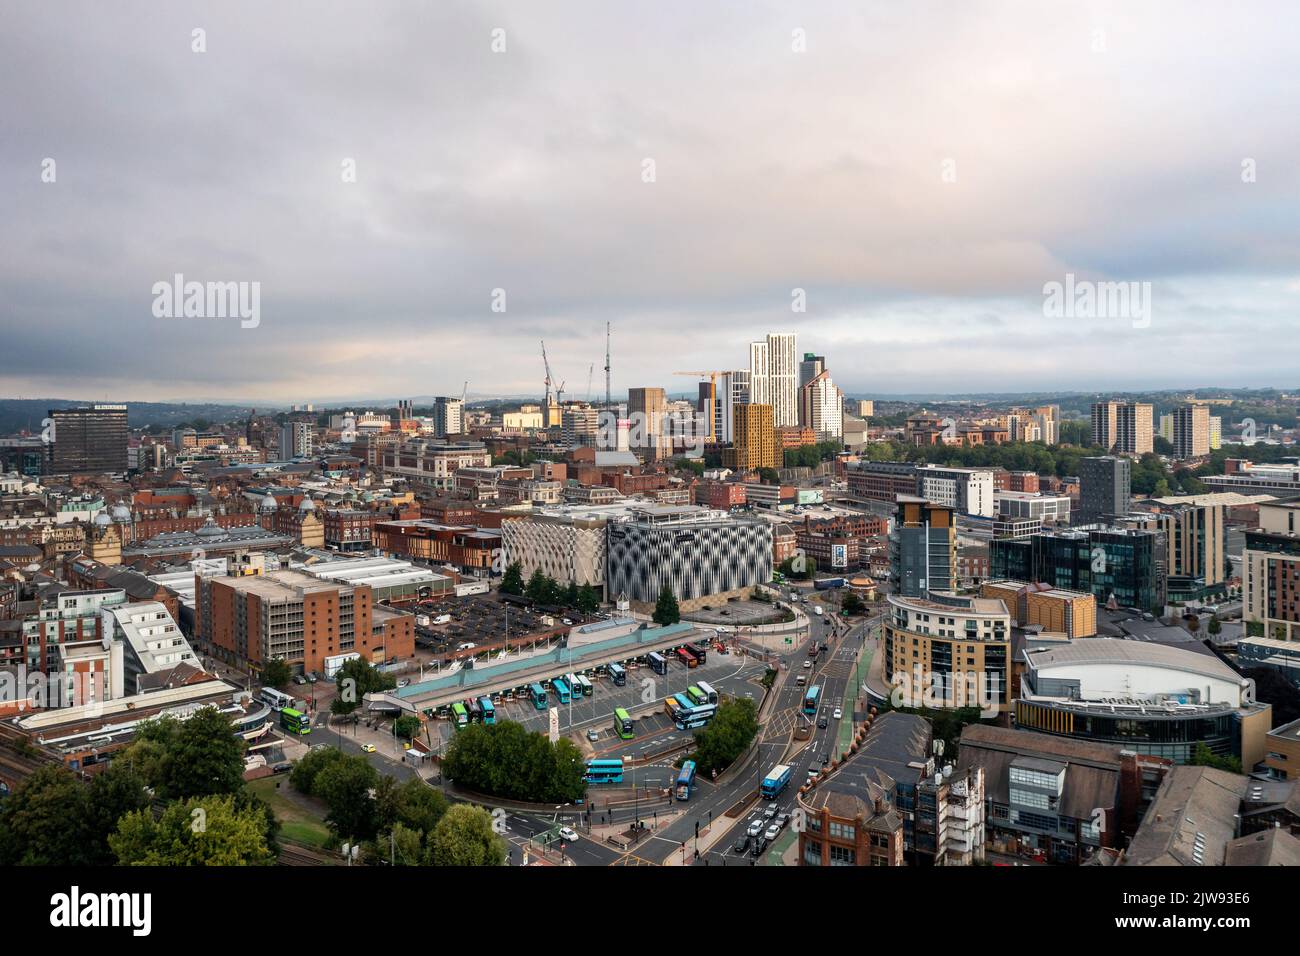 LEEDS, UK - SEPTEMBER 2, 2022. Aerial panorama view of Leeds city centre with bus station and Victoria shopping centre prominent Stock Photo